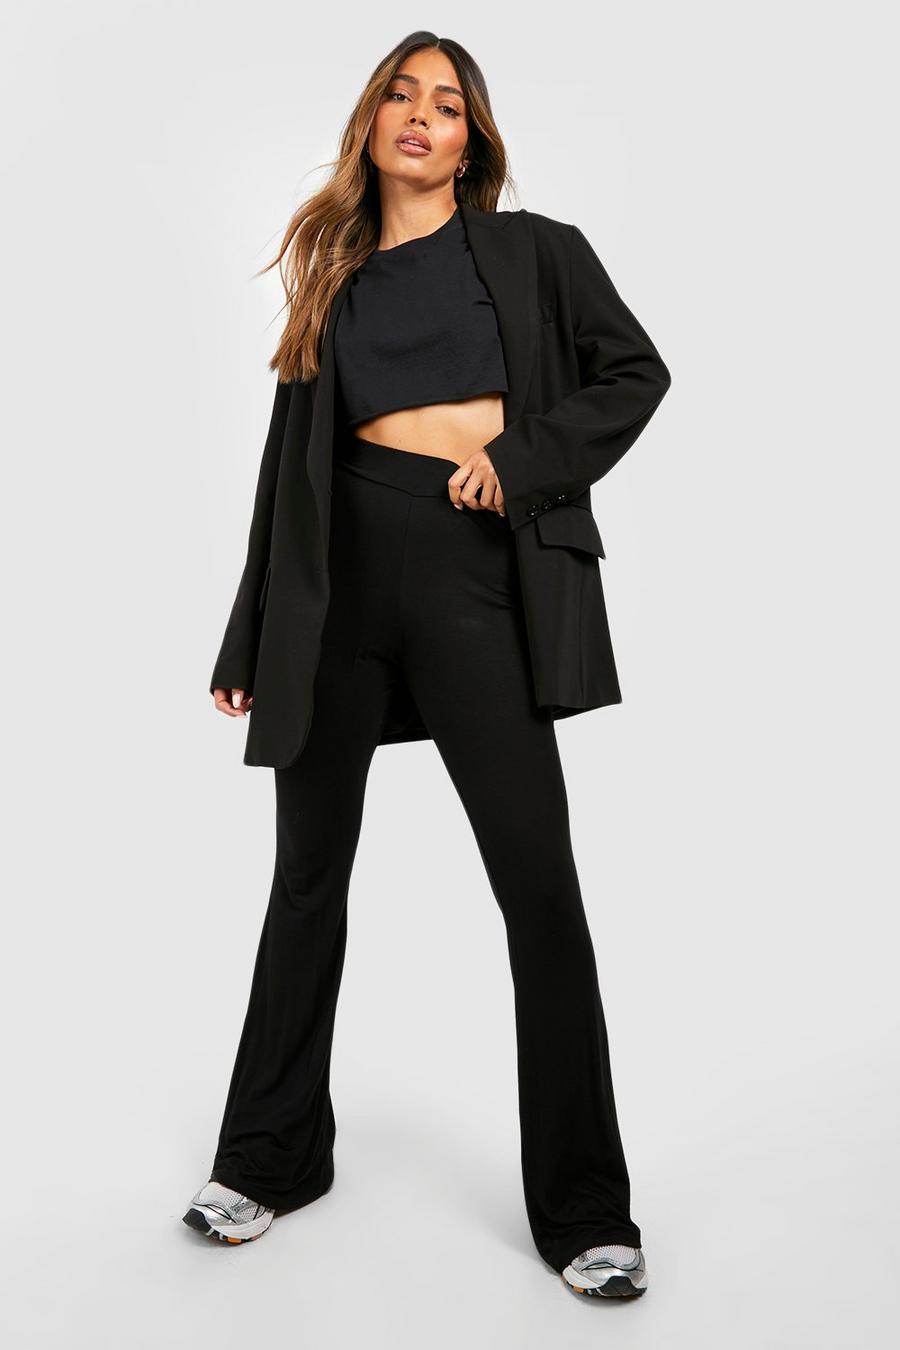 Black High Waist Basic Fit And Flare Pants